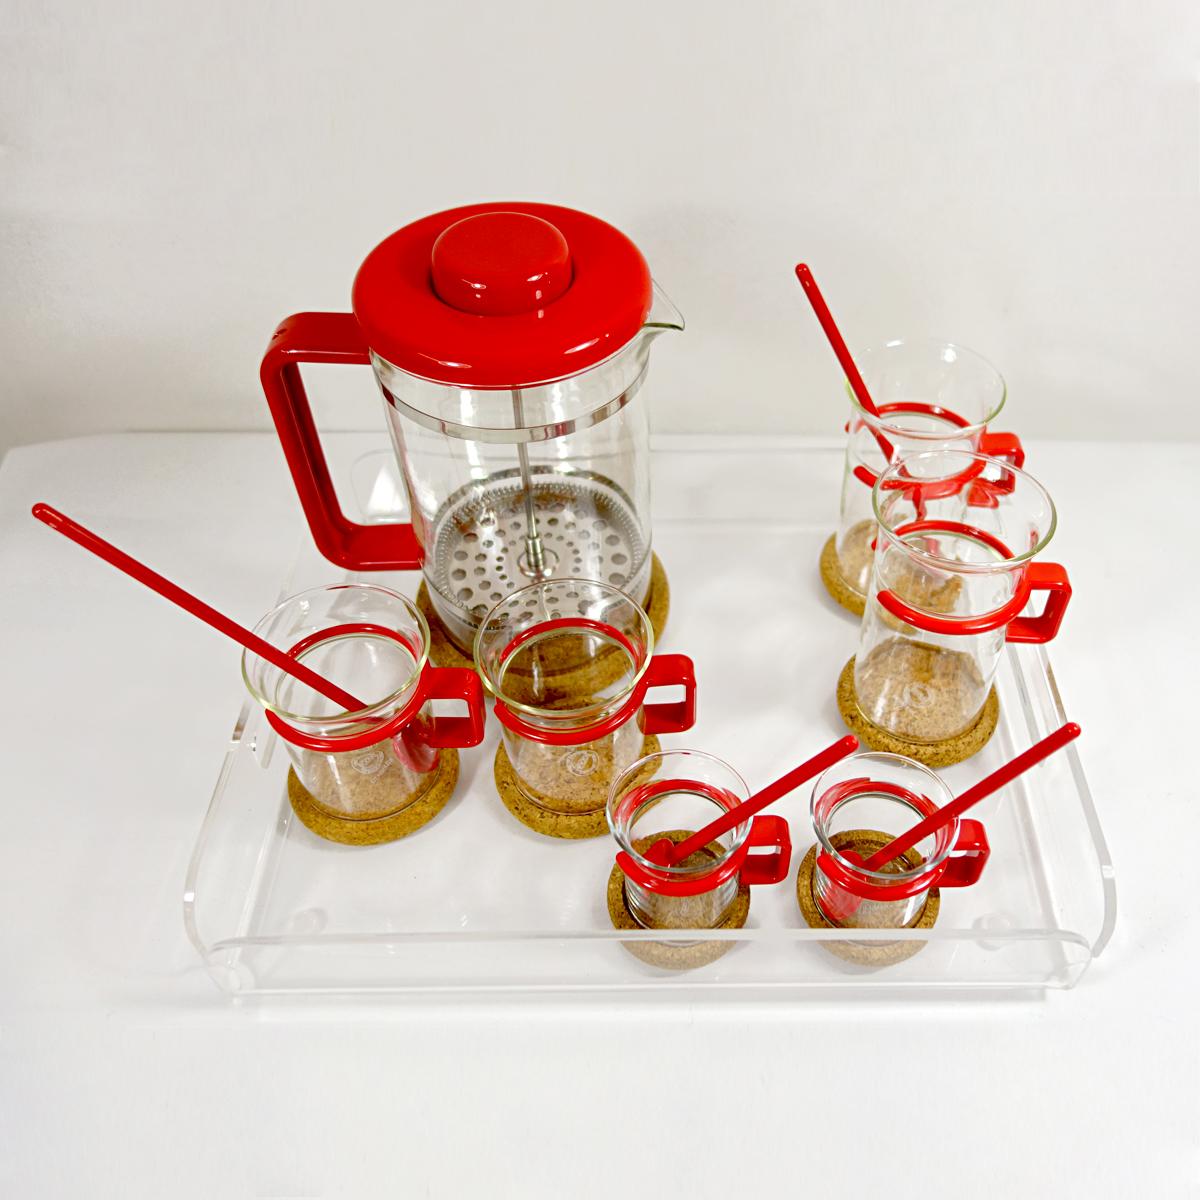 This refined yet striking coffee set was made for two. It is complete and still new as it has never been used. It consists of a French press, two coffee glasses, two espresso glasses, two latte glasses, four tea spoons, seven coasters and a